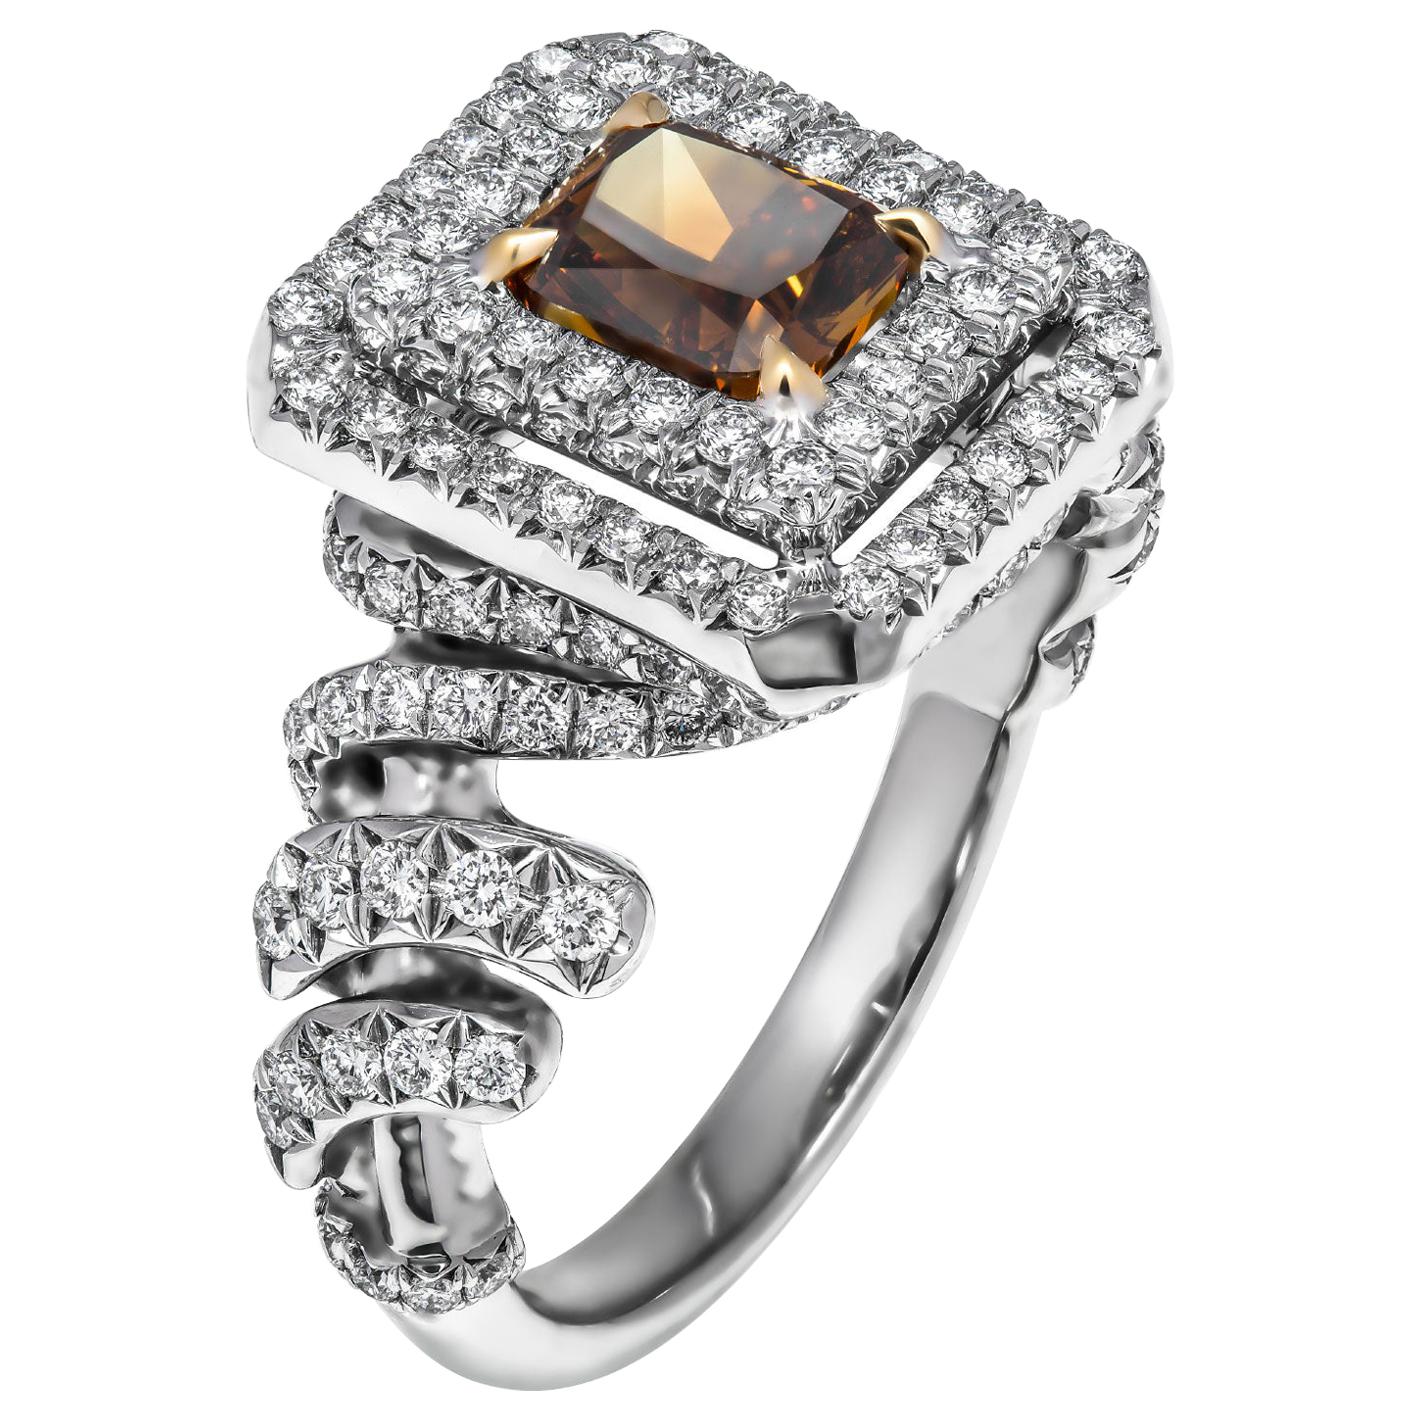 GIA Certified Cocktail Ring with 1.01 Carat Fancy Deep Orange-Brown Diamond For Sale